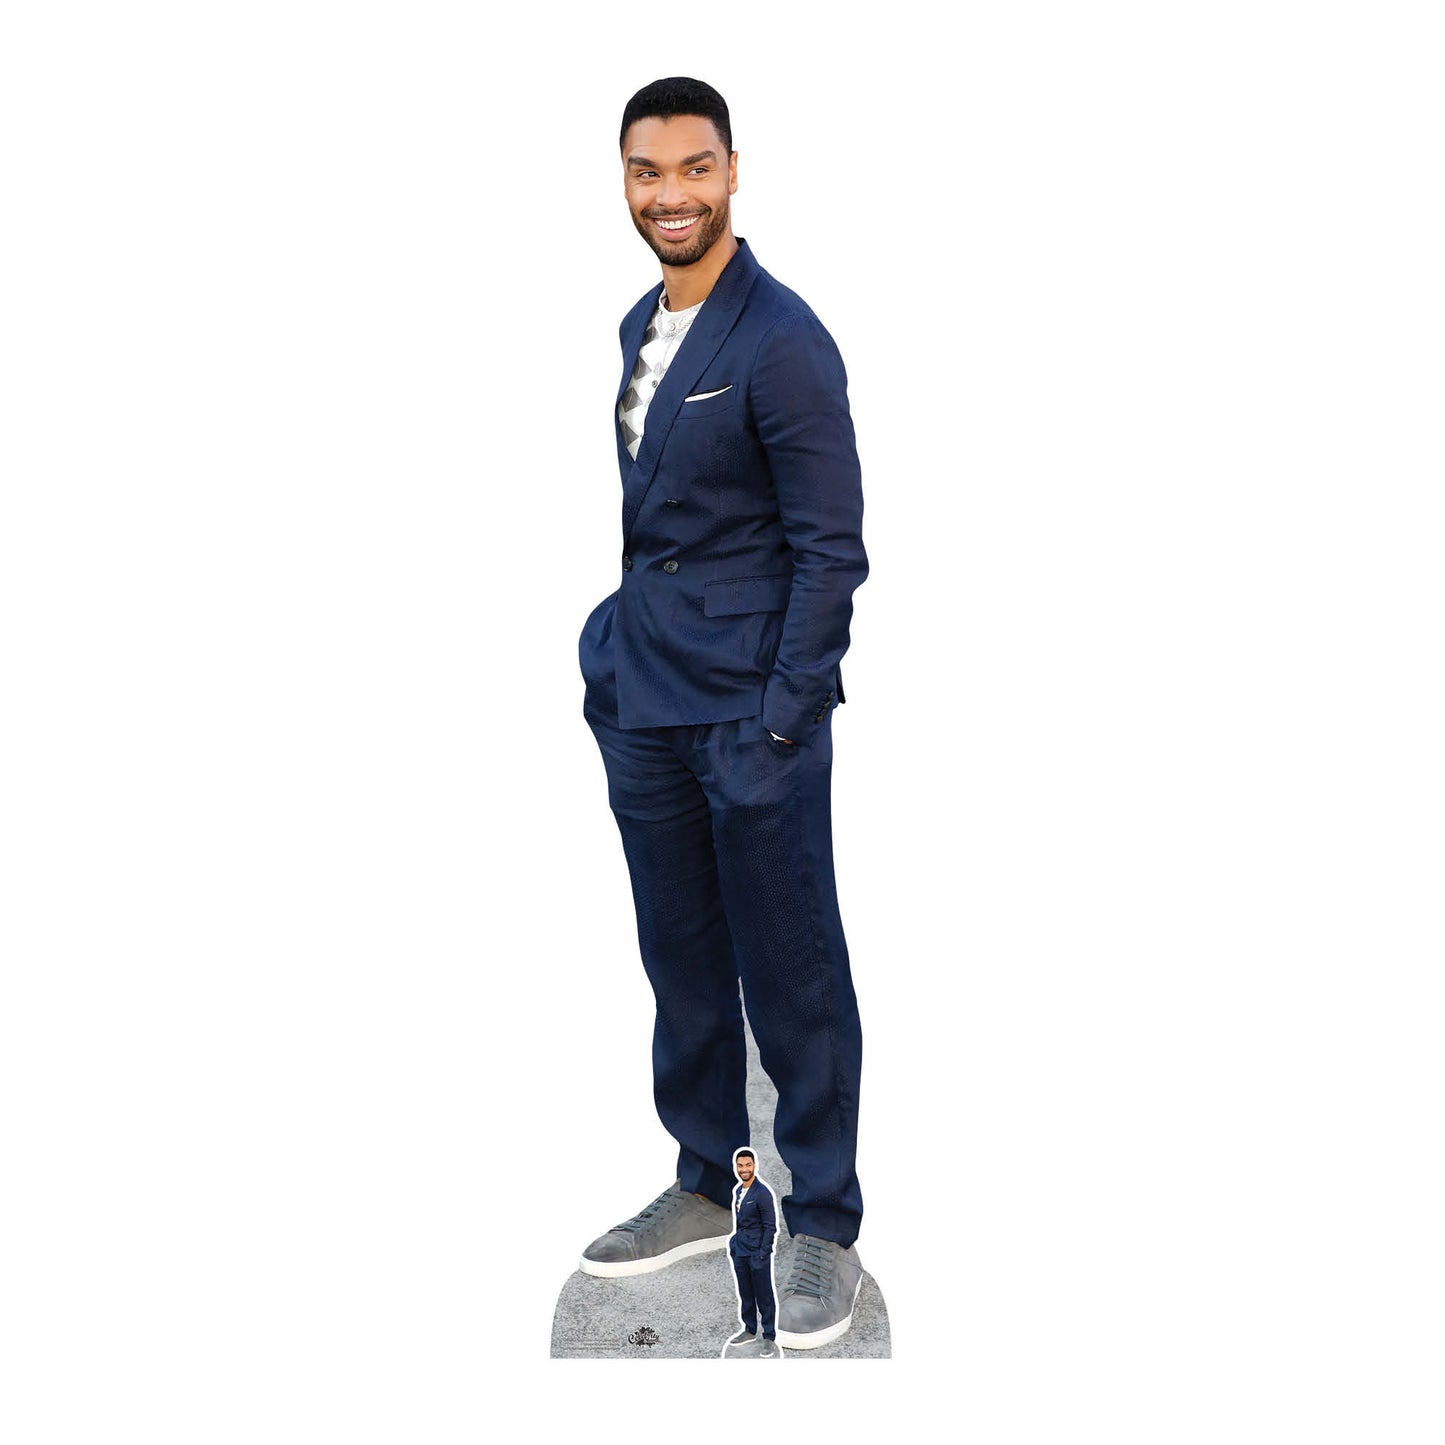 CS1053 Rege Jean Page Blue Suit Height 183cm Lifesize Cardboard Cut Out With Mini